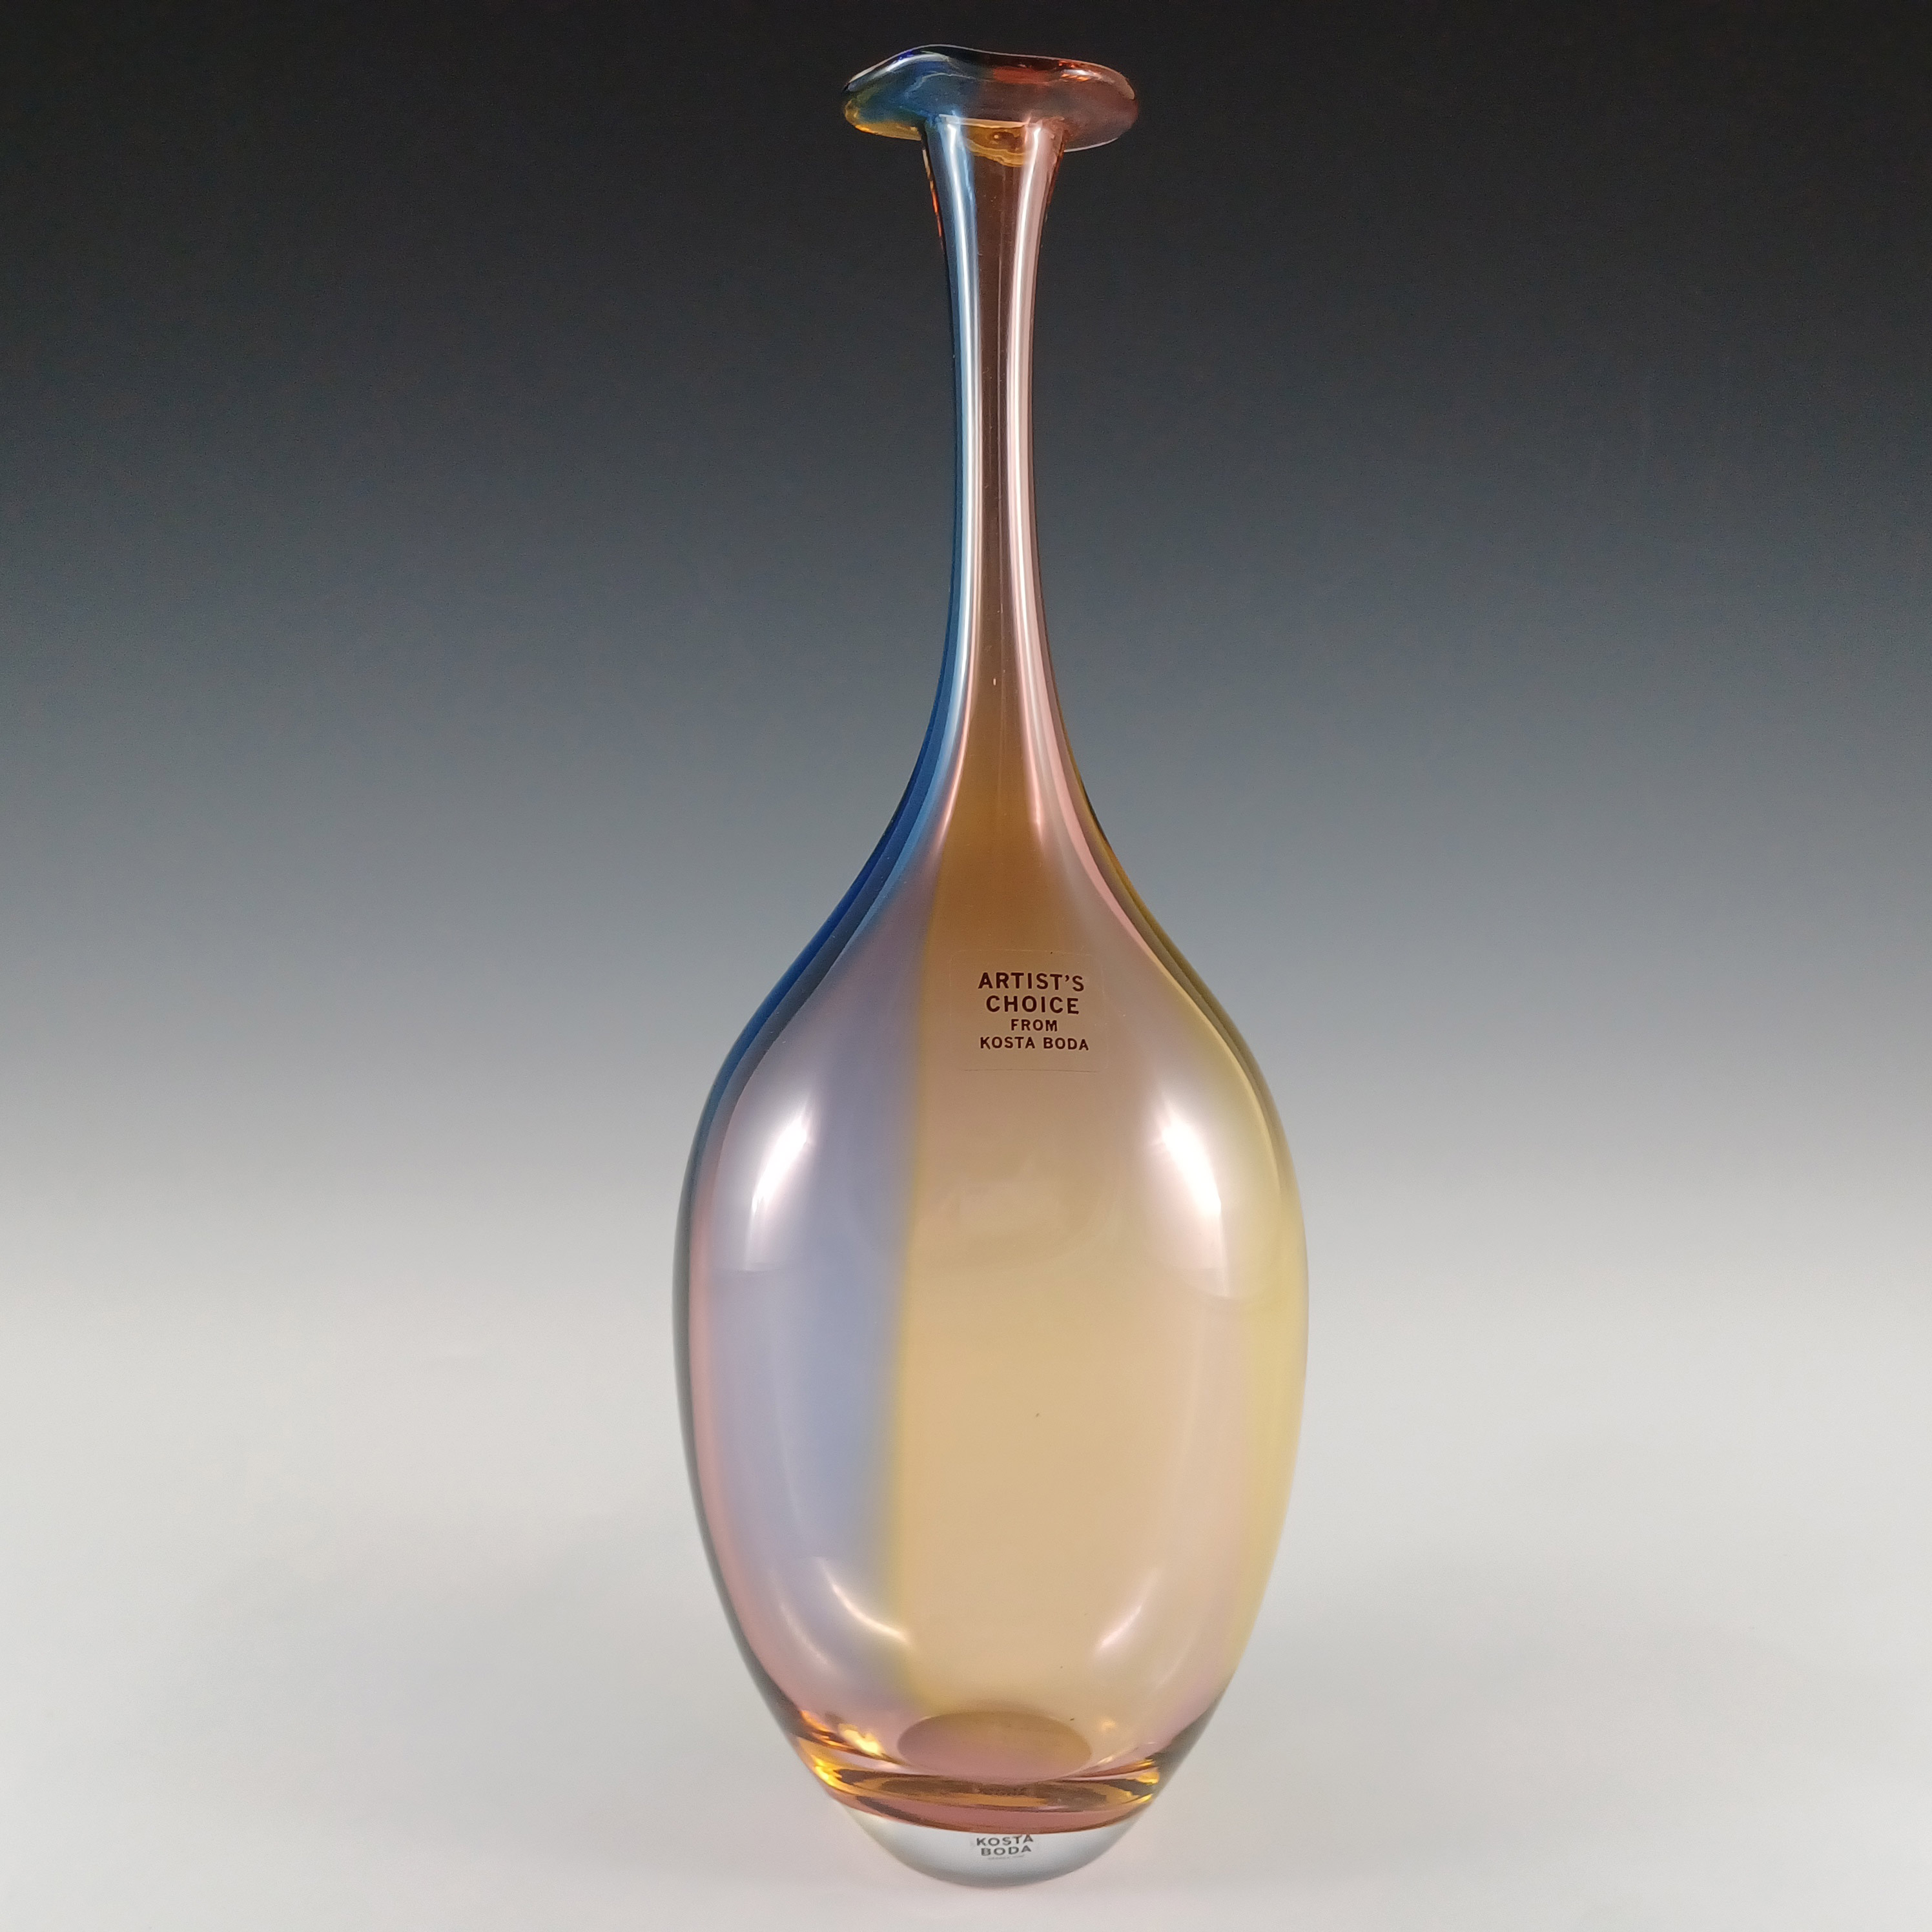 (image for) SIGNED & BOXED Kosta Boda "Fidji" Glass Vase by Kjell Engman - Click Image to Close